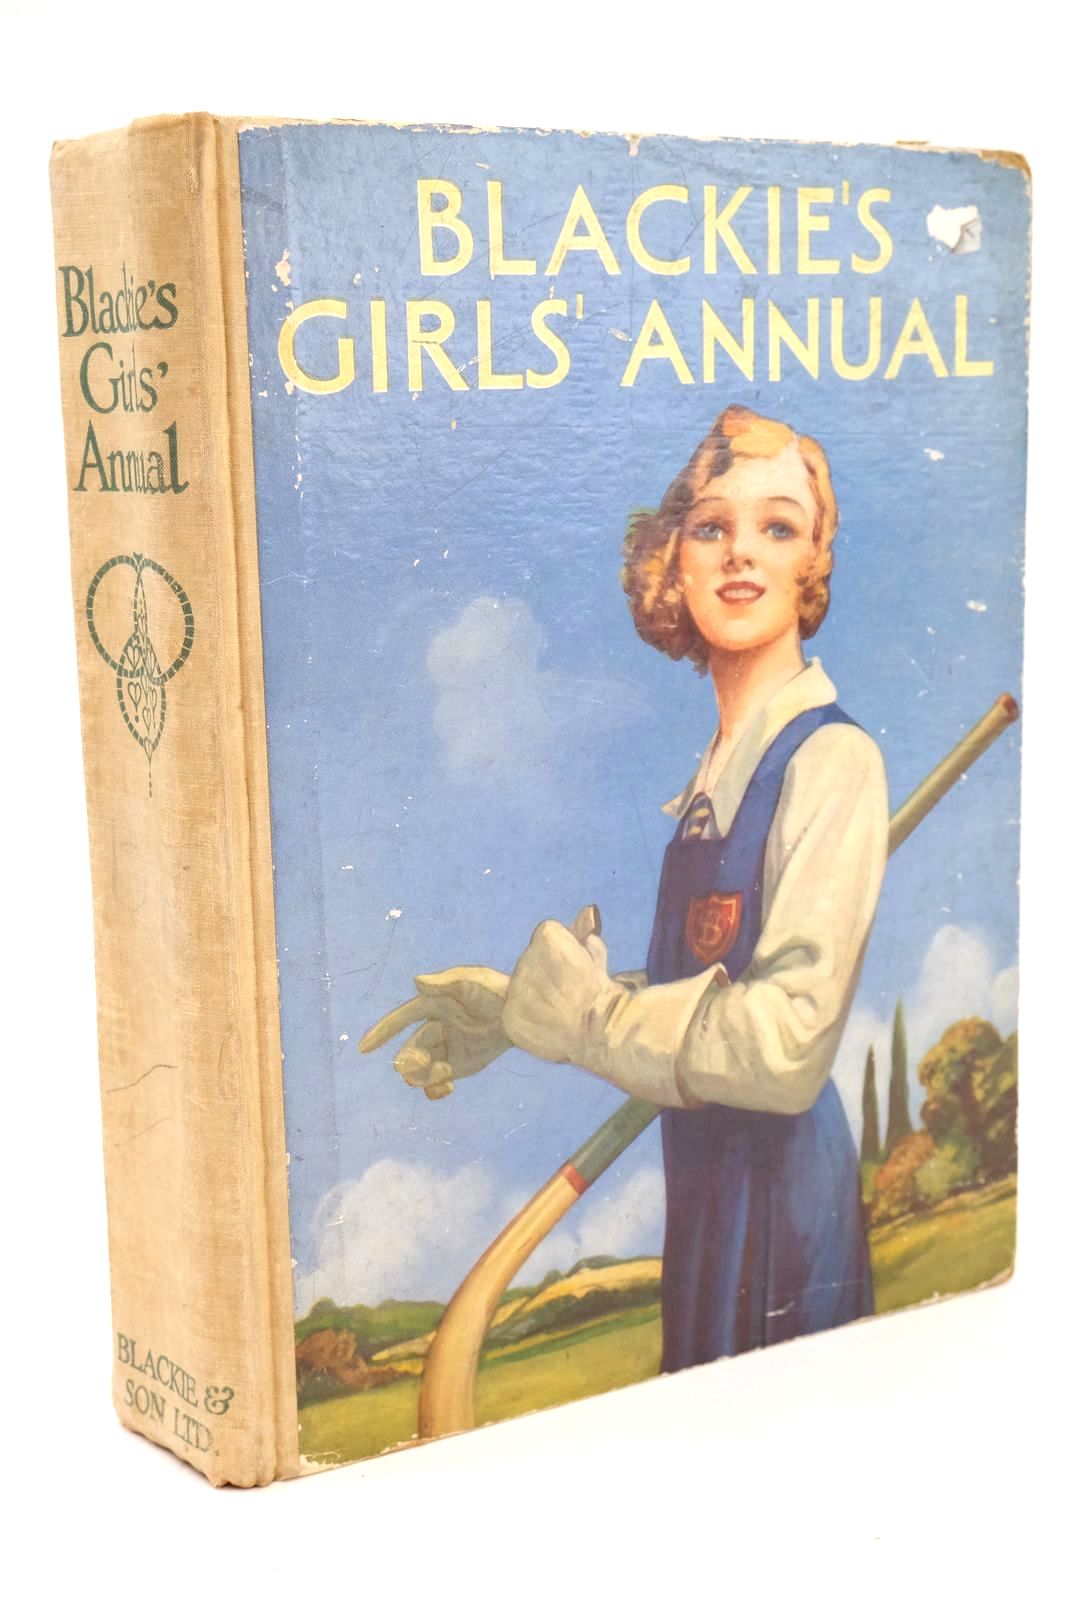 Photo of BLACKIE'S GIRLS' ANNUAL written by Bickersteth, Constance
Cumming, Primrose
Cobb, Ruth
et al, illustrated by Cobb, Ruth
Brock, R.H.
Bestall, Alfred
Soper, Eileen
et al., published by Blackie & Son Ltd. (STOCK CODE: 1324765)  for sale by Stella & Rose's Books